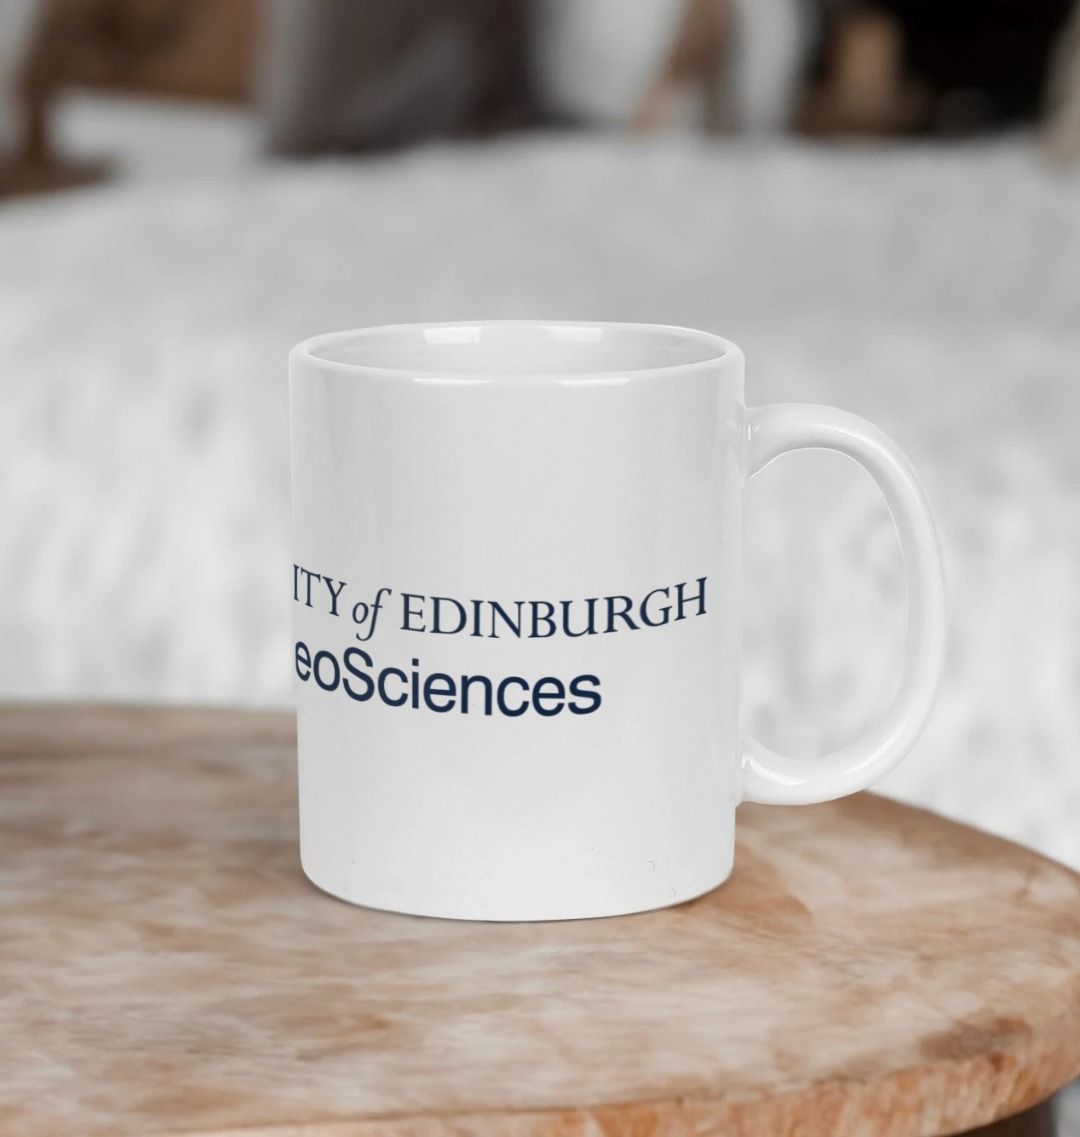 White School of GeoSciences mug with multi-colour printed University crest and logo